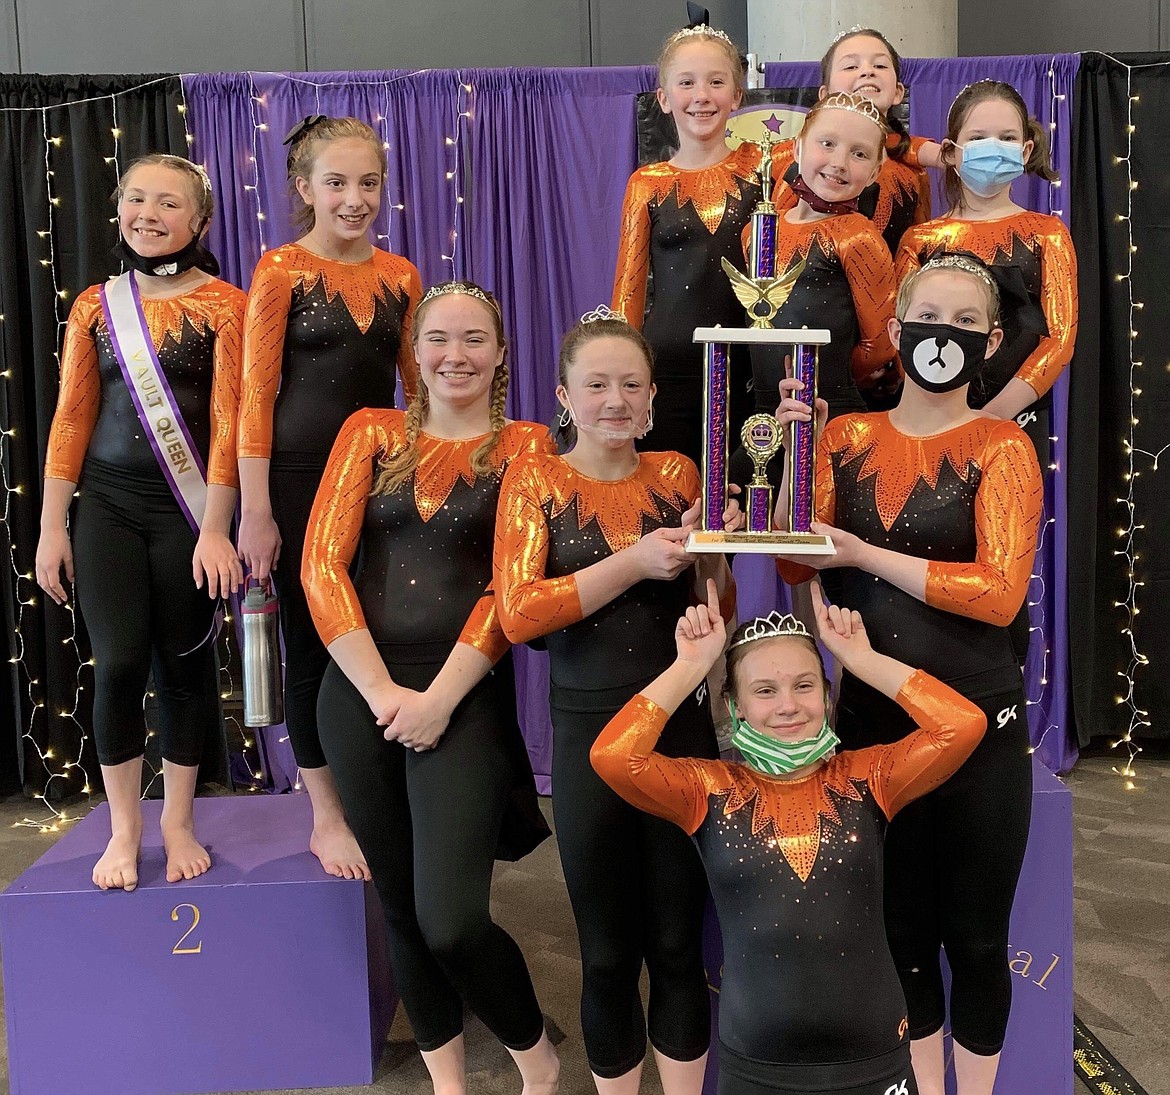 Courtesy photo
North Idaho Gymnastics Xcel Bronze took first place team at the Royal Festival at the Spokane Convention Center March 6-7. In the front row is Aubrey Gregerson; second row from left, Elizabeth Phillips, Sue Millard and Veronica Ault; third row from left, Laina Busicchia, Delainey Wenstrom, Elleah Hubbard and Hannah Fisher, and back row from left, Fynlie Reynolds and Allie Netzel.